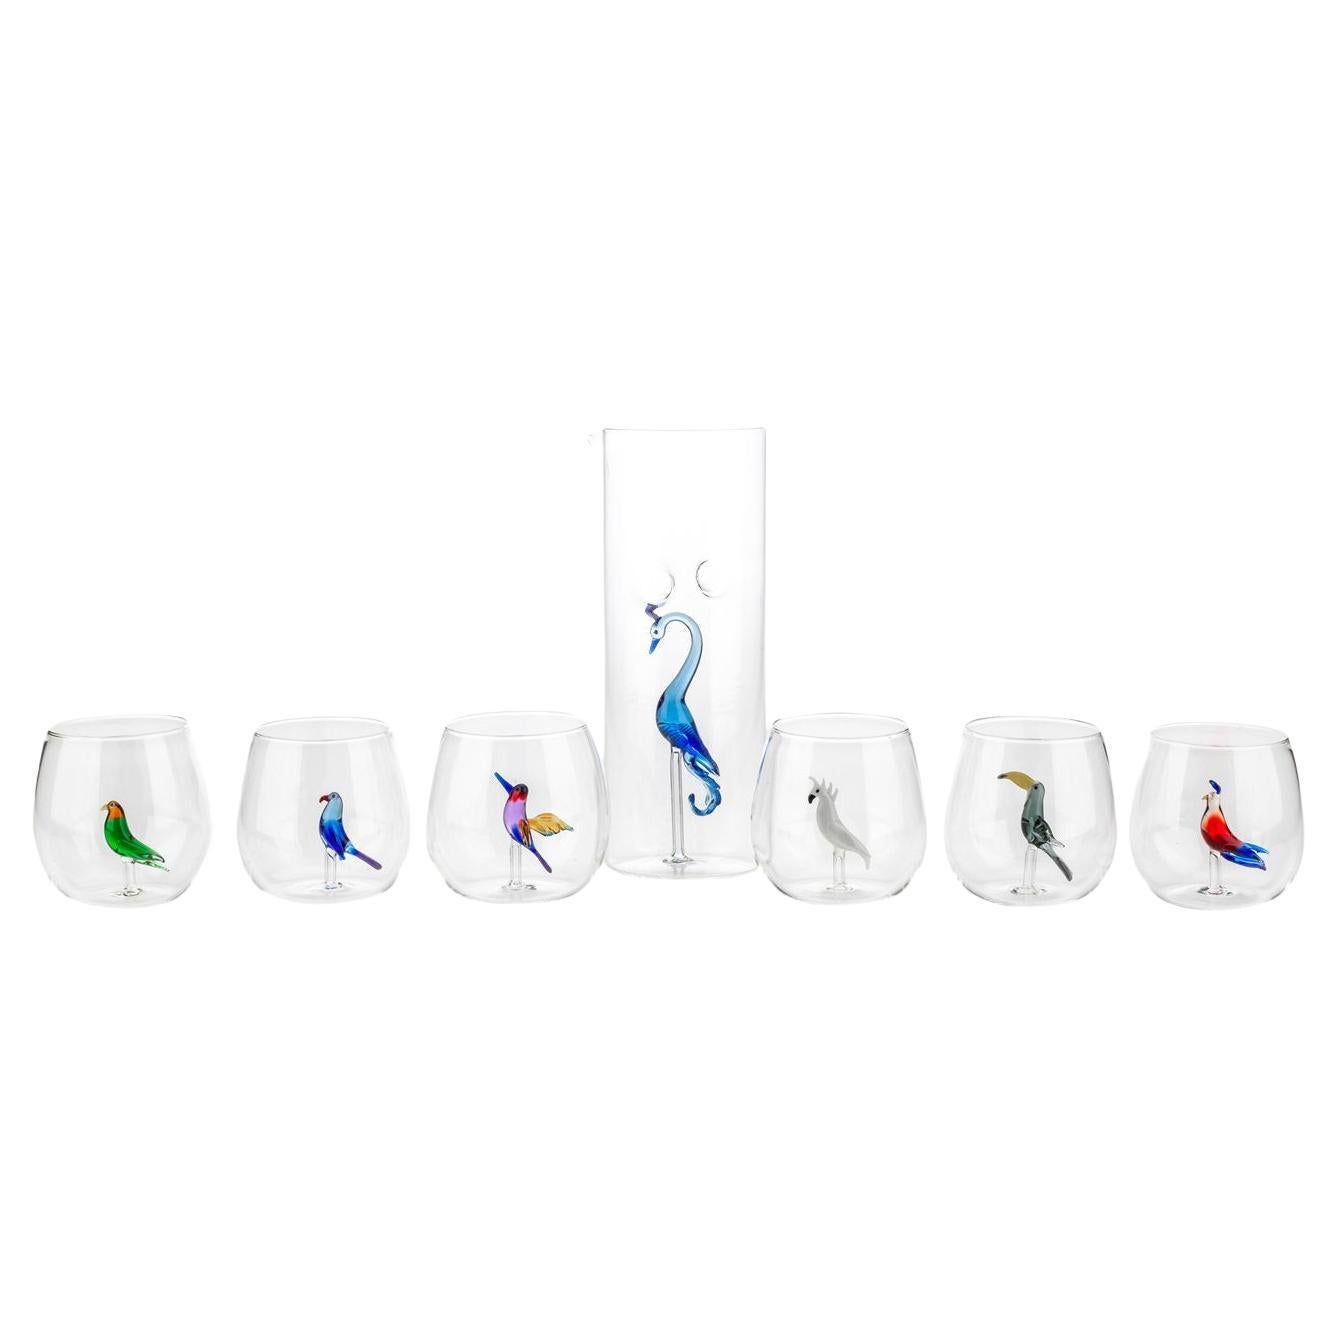 Set of 6 Tropical Bird Glasses and Peacock Pitcher